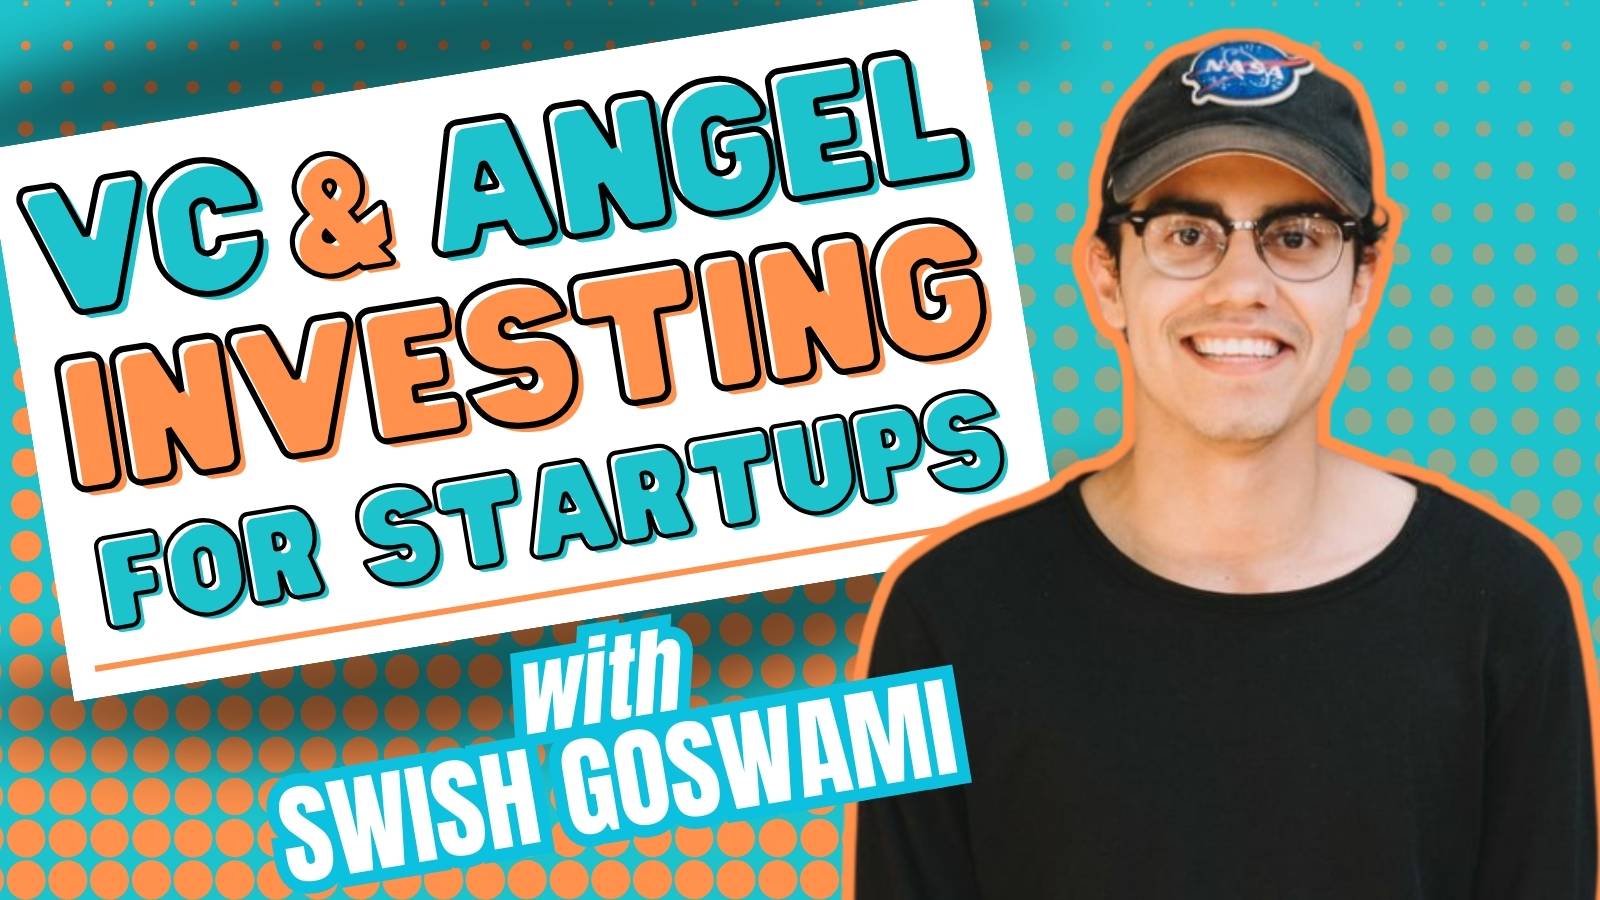 VC and Angel Investing for Startups with Swish Goswami